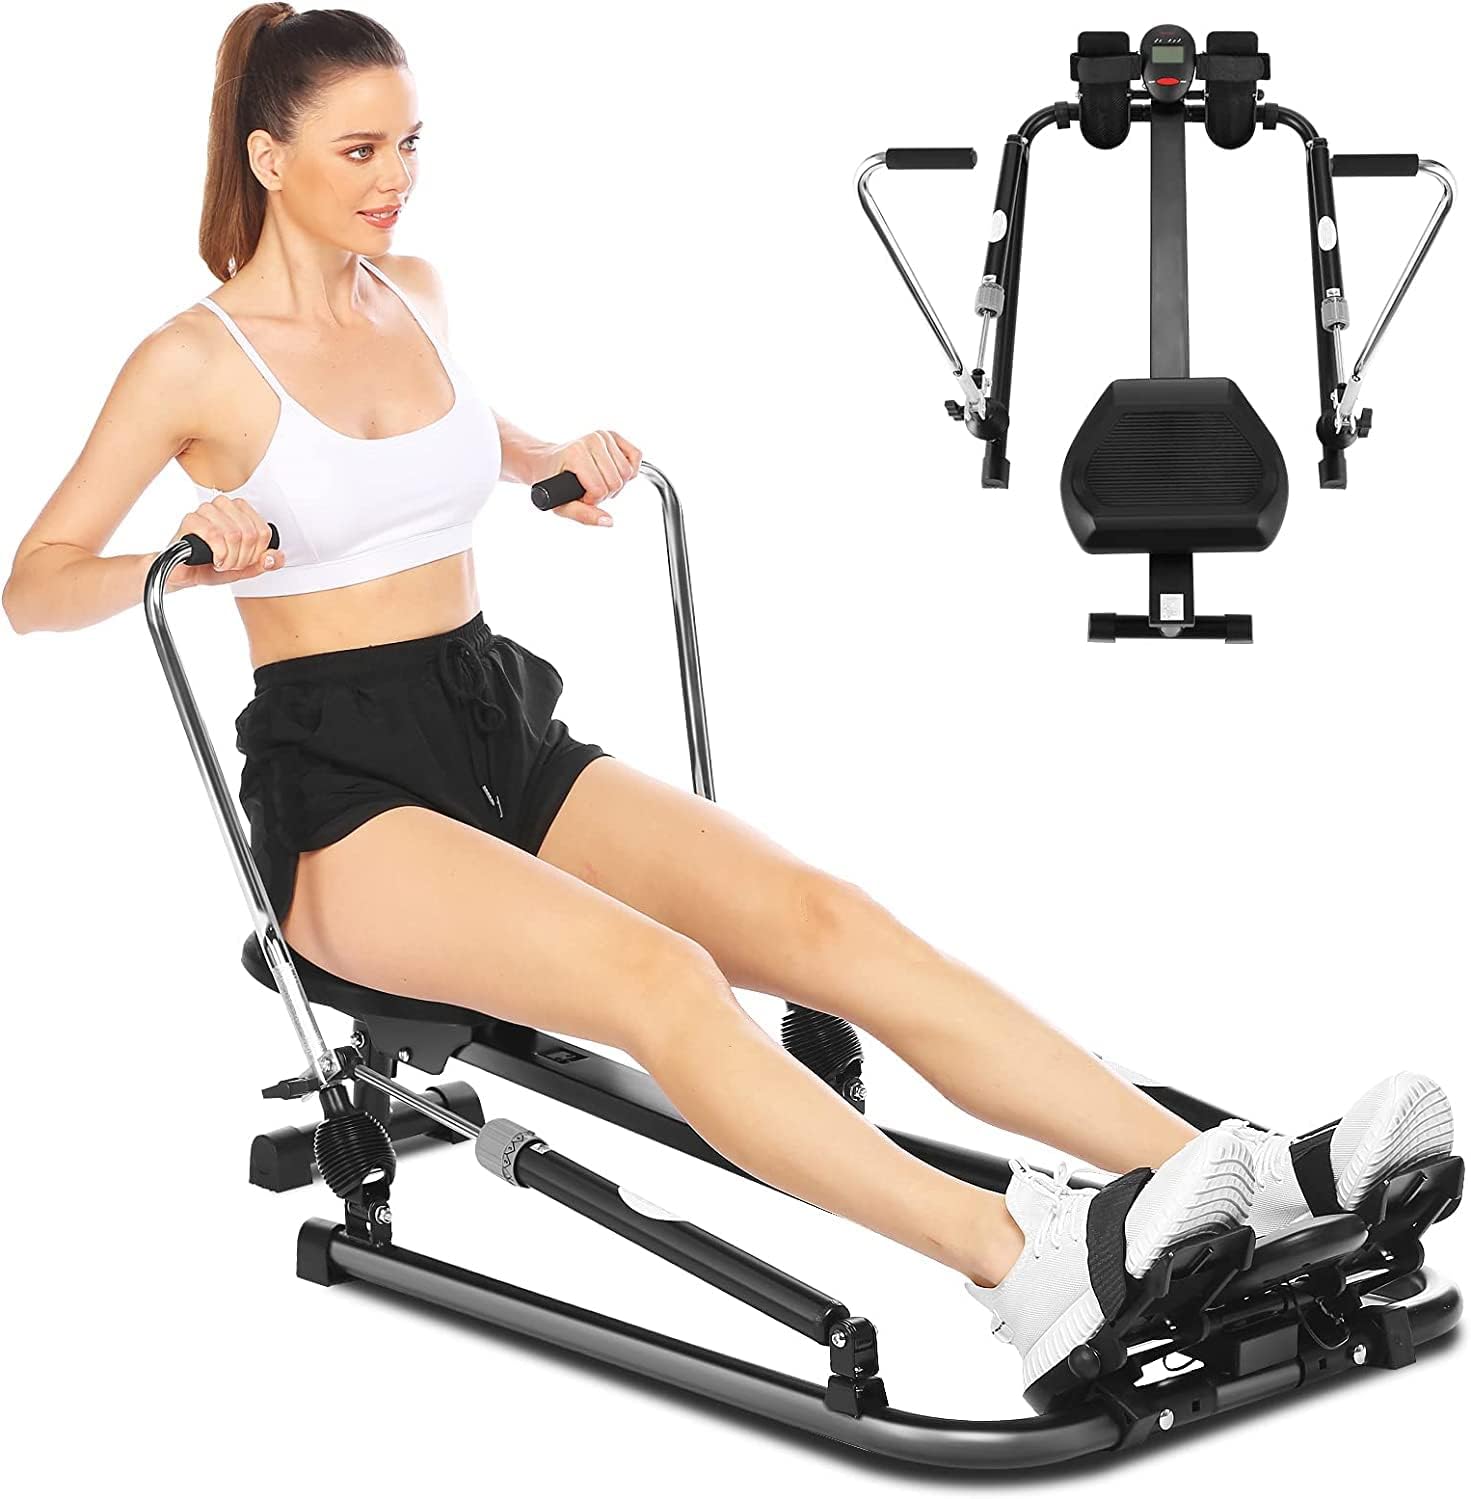 Ancheer Foldable Full Motion Rowing Machine w/LCD Monitor,12 Levels Adjustable Resistance Hydraulic Rower for Home,290LB Weight Capacity